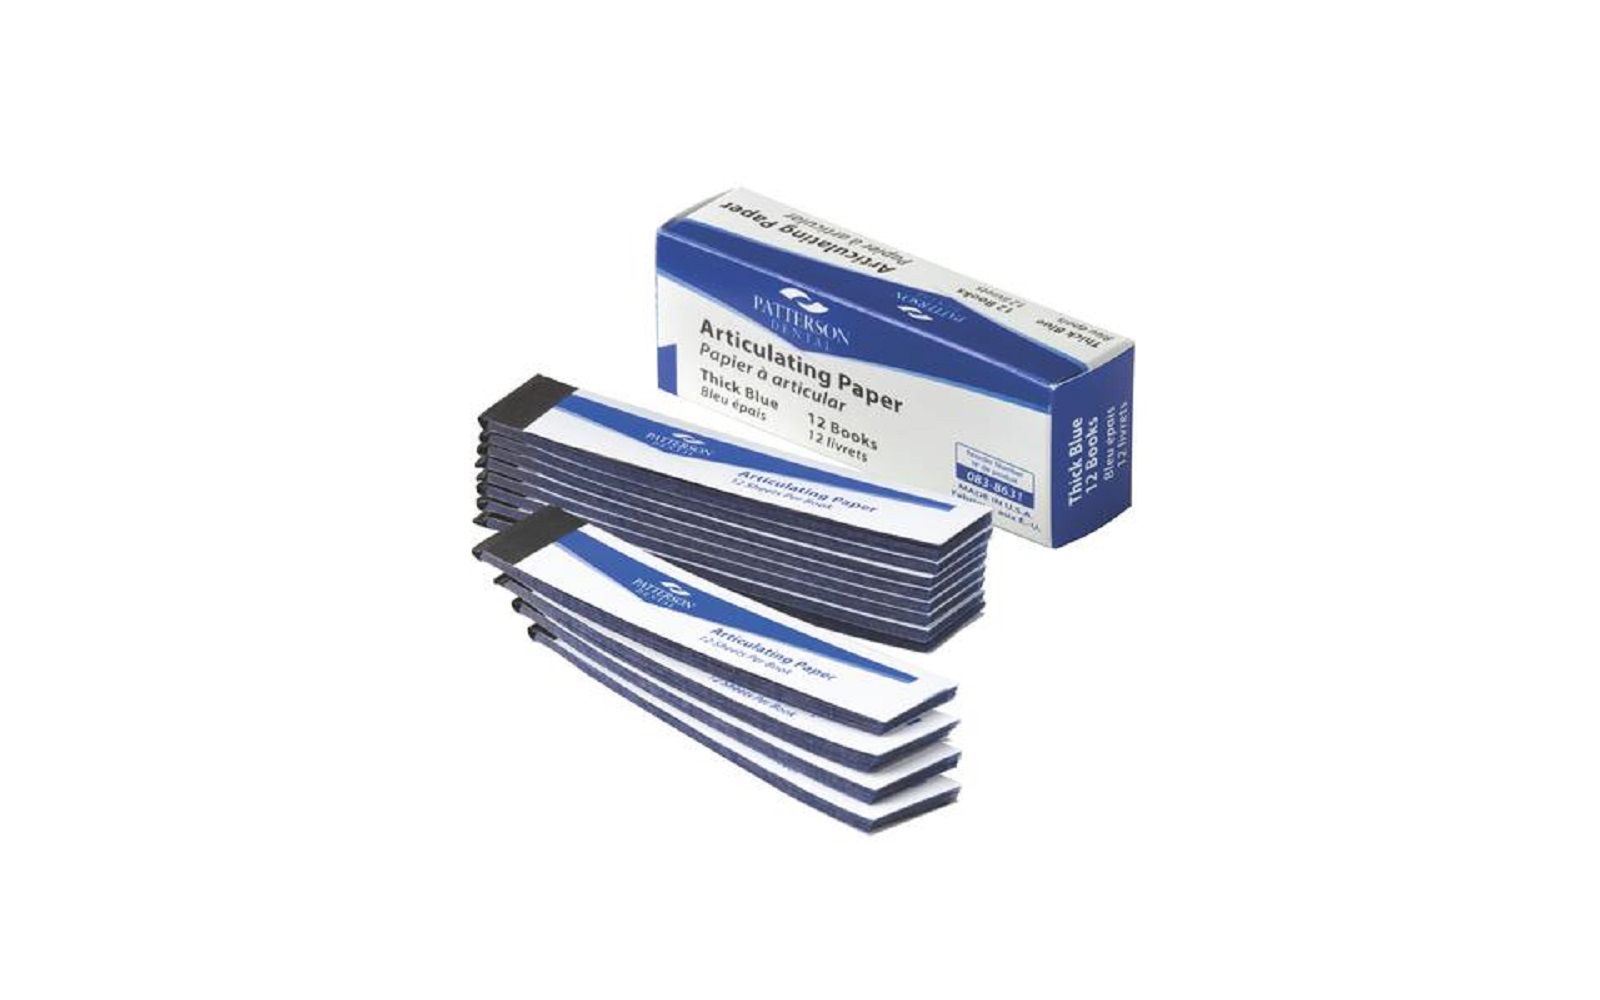 Patterson® articulating paper - patterson dental supply